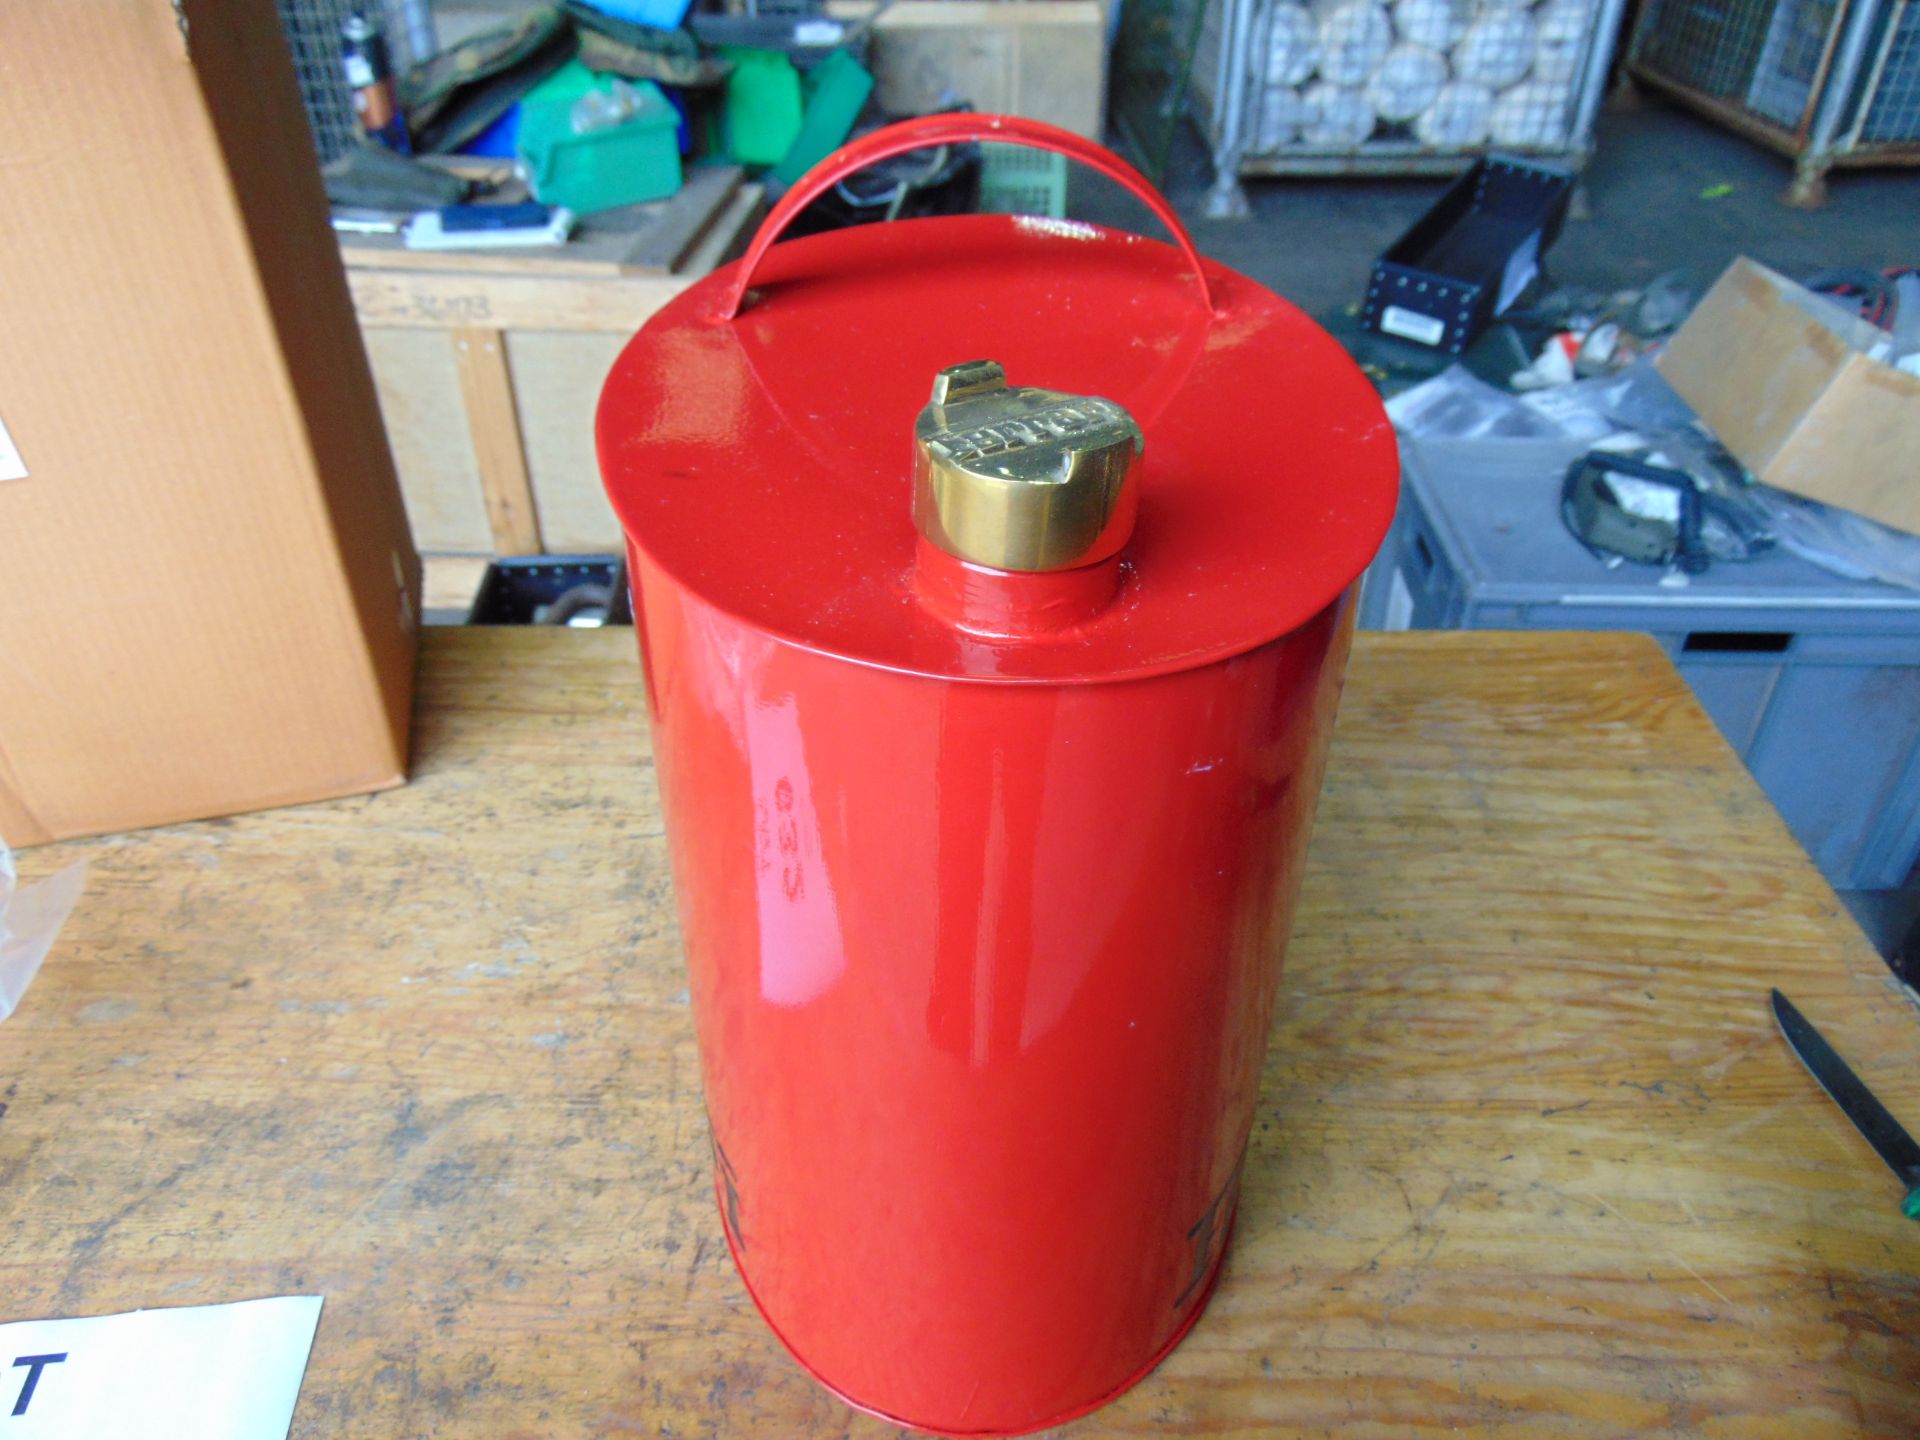 Ferrari Hand Painted 1 Gall Fuel/Oil Can with Brass Cap - Image 5 of 5